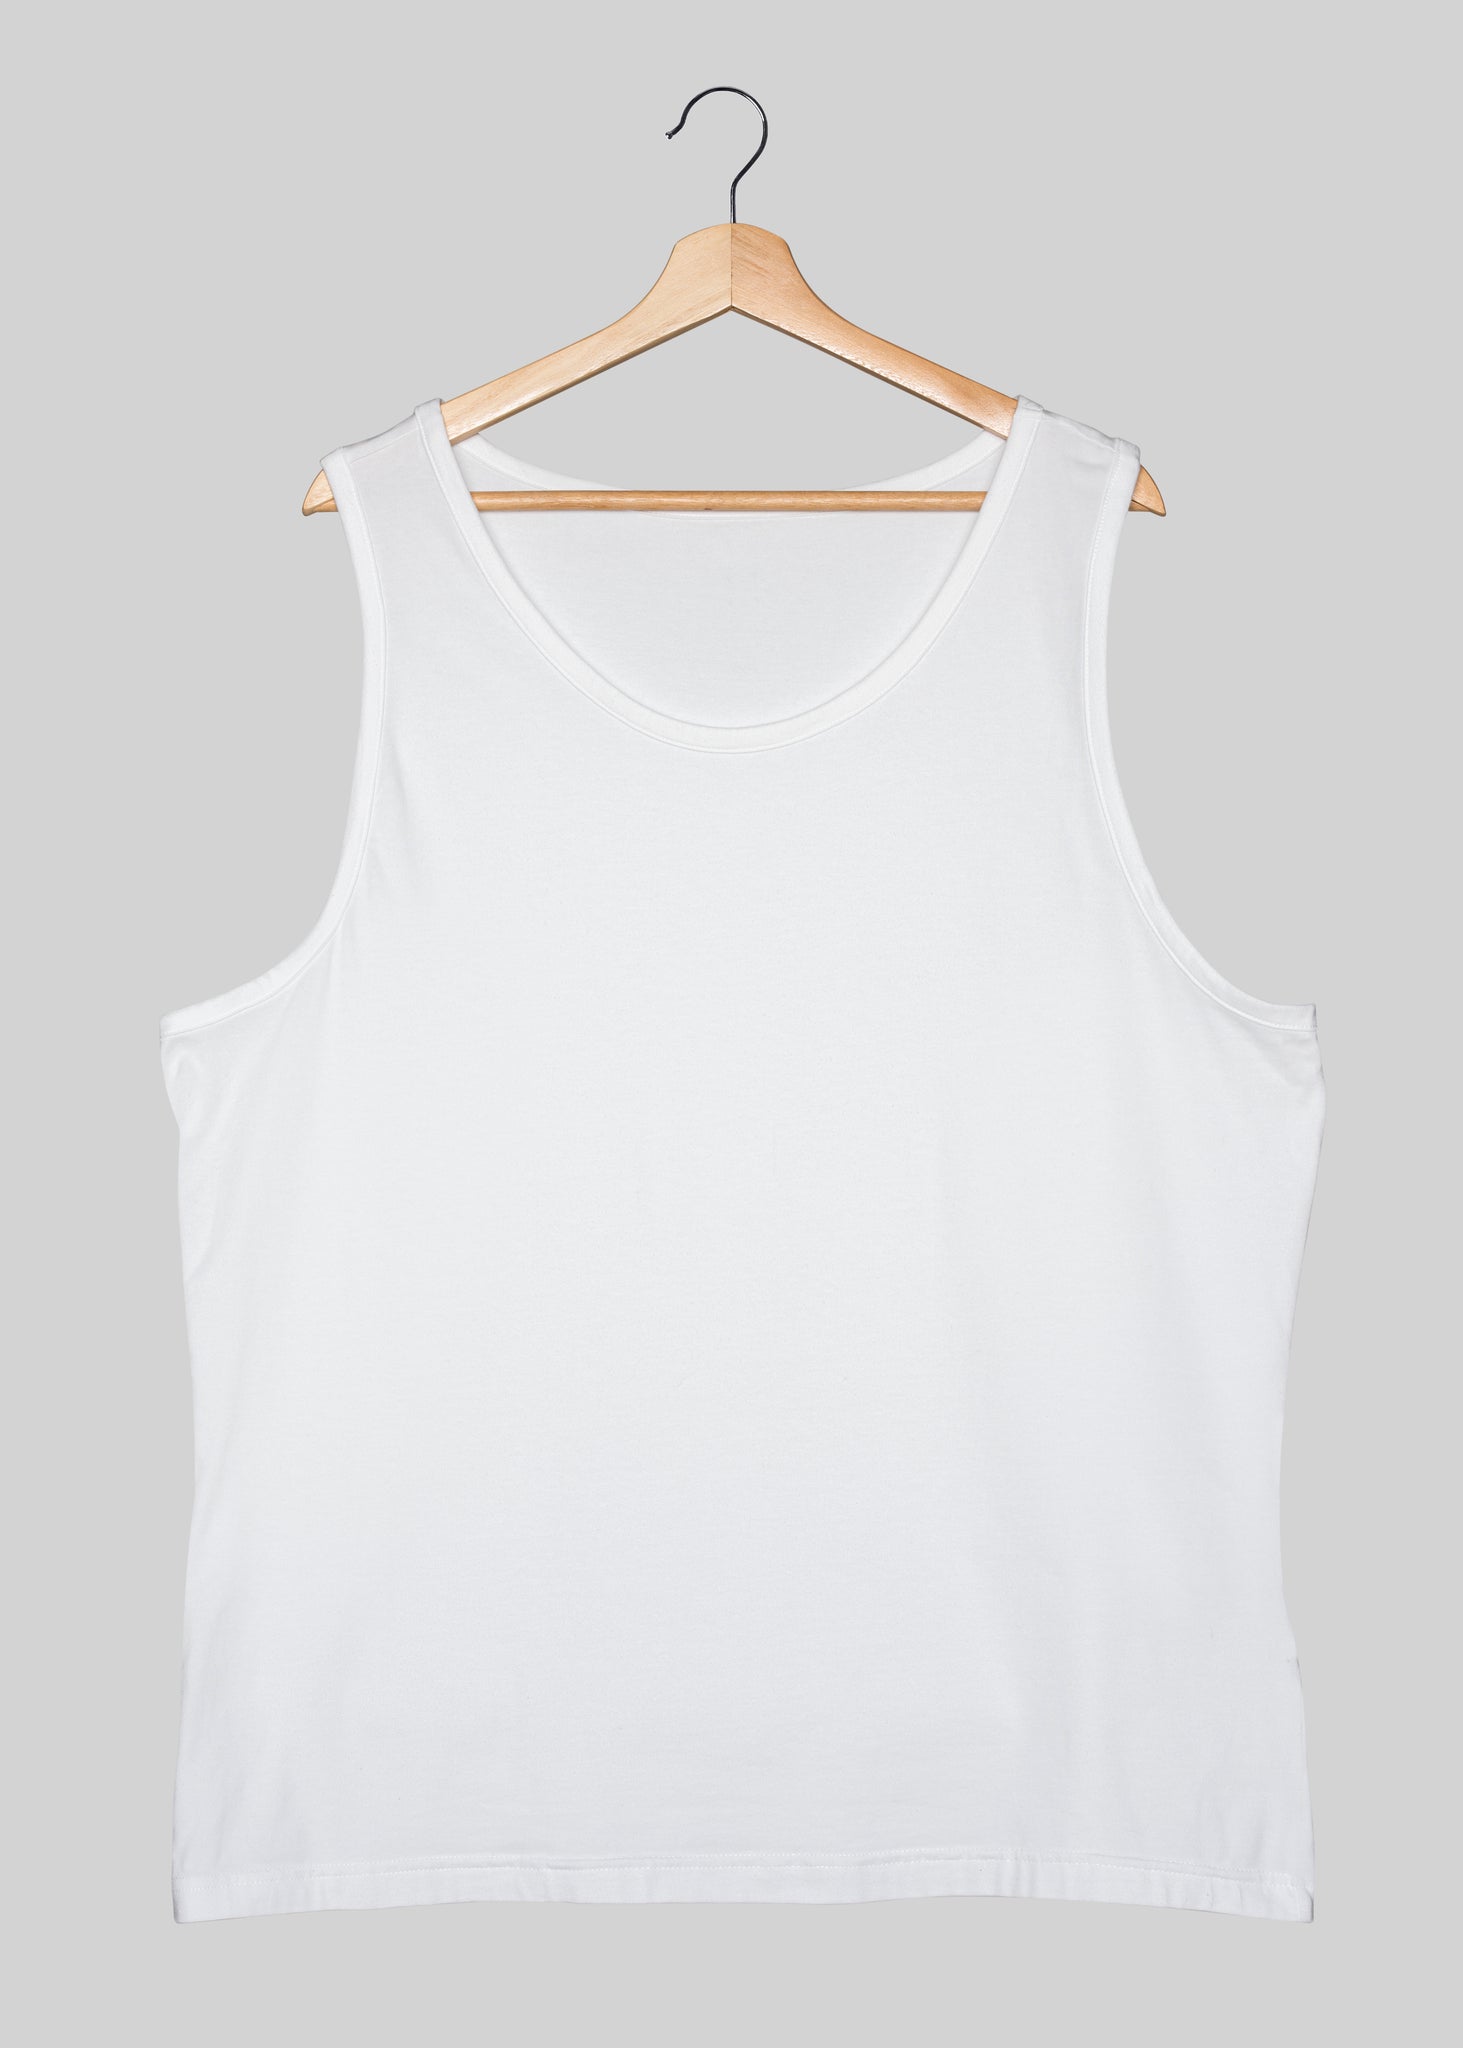 Elevate Your Wardrobe with Stylish Tank Tops: Make a Statement!